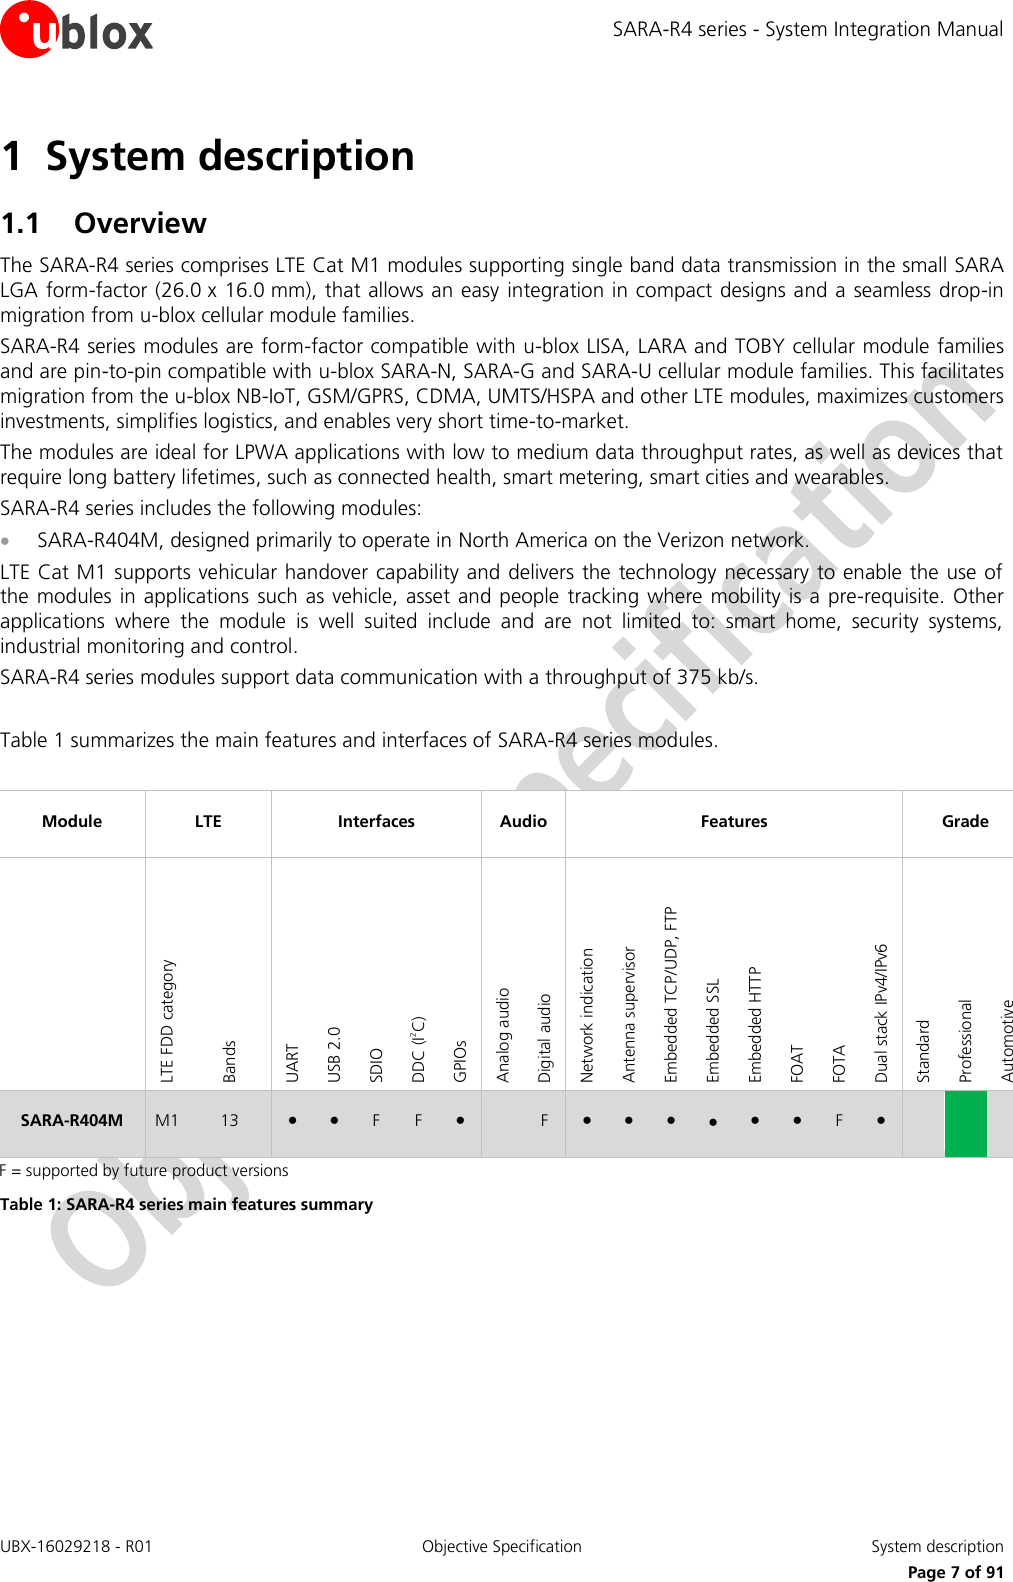 SARA-R4 series - System Integration Manual UBX-16029218 - R01  Objective Specification  System description     Page 7 of 91 1 System description 1.1 Overview The SARA-R4 series comprises LTE Cat M1 modules supporting single band data transmission in the small SARA LGA form-factor (26.0 x 16.0 mm), that allows an easy integration in compact designs and a seamless drop-in migration from u-blox cellular module families. SARA-R4 series modules are form-factor compatible with u-blox LISA, LARA and TOBY cellular module families and are pin-to-pin compatible with u-blox SARA-N, SARA-G and SARA-U cellular module families. This facilitates migration from the u-blox NB-IoT, GSM/GPRS, CDMA, UMTS/HSPA and other LTE modules, maximizes customers investments, simplifies logistics, and enables very short time-to-market. The modules are ideal for LPWA applications with low to medium data throughput rates, as well as devices that require long battery lifetimes, such as connected health, smart metering, smart cities and wearables. SARA-R4 series includes the following modules:  SARA-R404M, designed primarily to operate in North America on the Verizon network. LTE Cat M1 supports vehicular handover capability and delivers the technology necessary to enable the use of the modules in applications  such as vehicle, asset and people tracking where  mobility is a pre-requisite. Other applications  where  the  module  is  well  suited  include  and  are  not  limited  to:  smart  home,  security  systems, industrial monitoring and control. SARA-R4 series modules support data communication with a throughput of 375 kb/s.  Table 1 summarizes the main features and interfaces of SARA-R4 series modules.  Module LTE Interfaces Audio Features Grade  LTE FDD category Bands UART USB 2.0 SDIO  DDC (I2C) GPIOs Analog audio Digital audio  Network indication Antenna supervisor Embedded TCP/UDP, FTP Embedded SSL Embedded HTTP FOAT FOTA Dual stack IPv4/IPv6 Standard Professional Automotive SARA-R404M M1 13 ● ● F F ●  F ● ● ● ● ● ● F ●    F = supported by future product versions Table 1: SARA-R4 series main features summary    